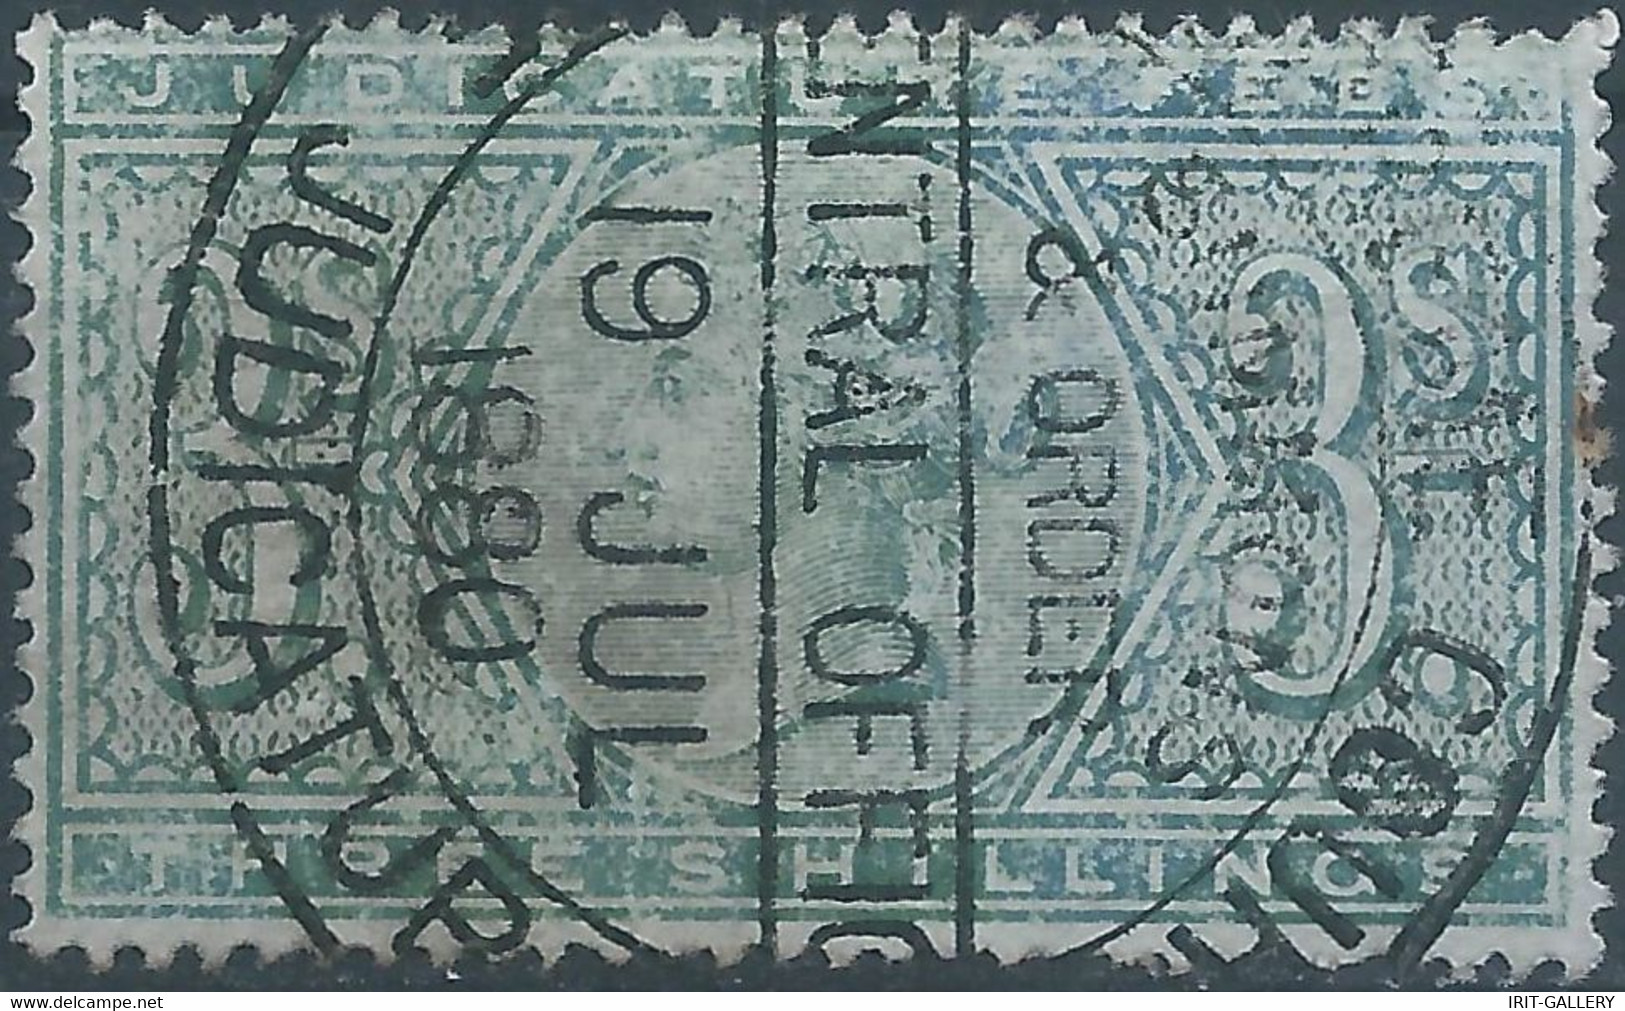 Great Britain-ENGLAND,Queen Victoria,1880 Revenue Stamp Tax Fiscal,JUDICATURE FEES, 3 Shillings,Used - Fiscale Zegels